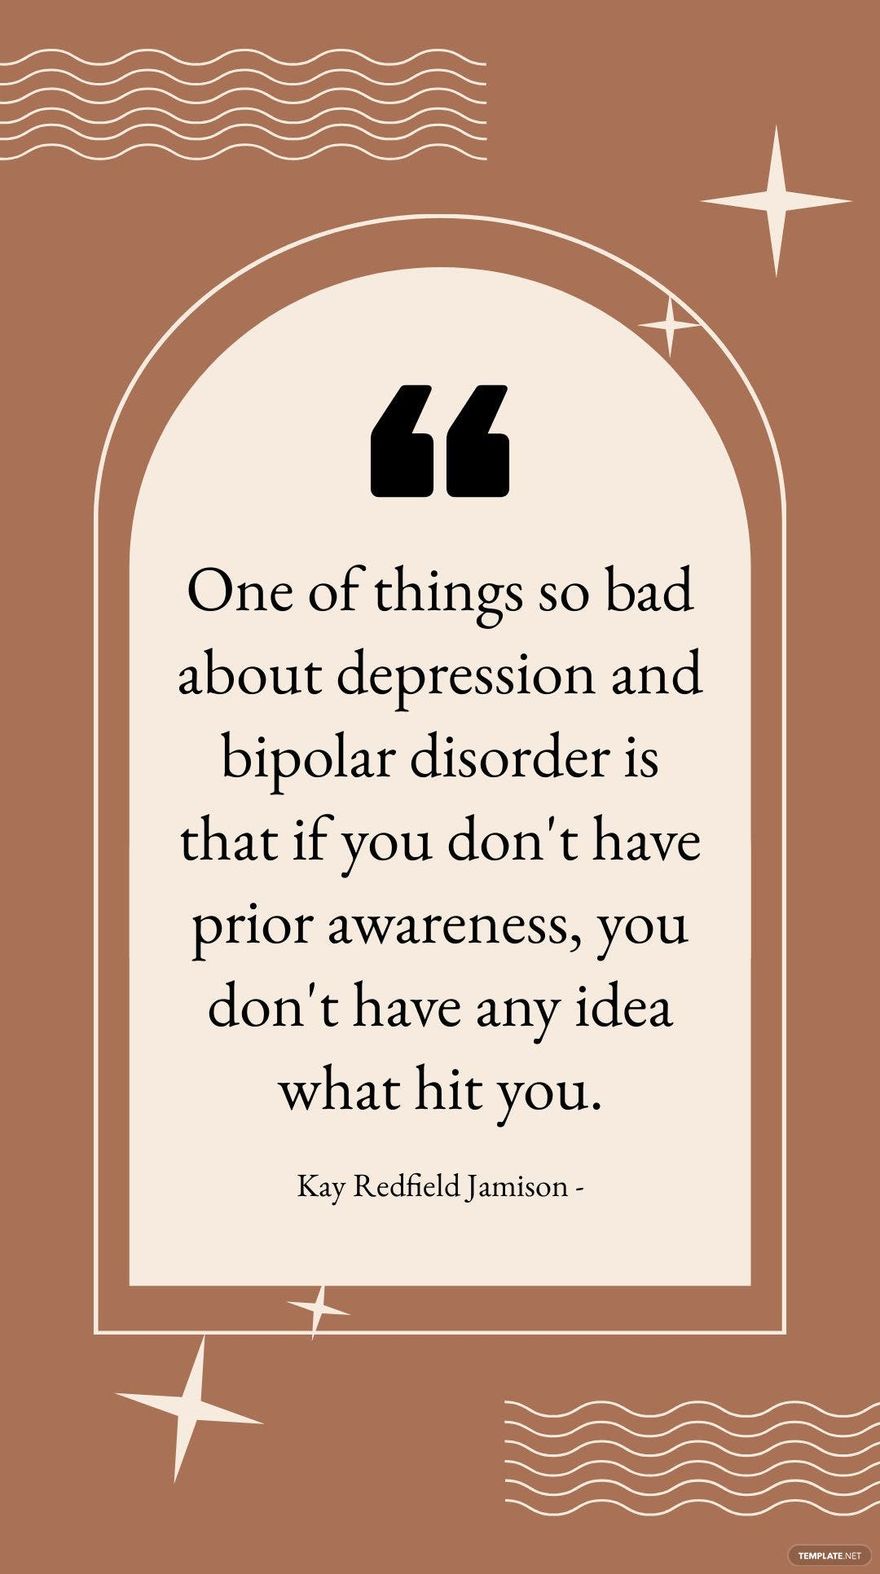 Kay Redfield Jamison - One of things so bad about depression and bipolar disorder is that if you don't have prior awareness, you don't have any idea what hit you.